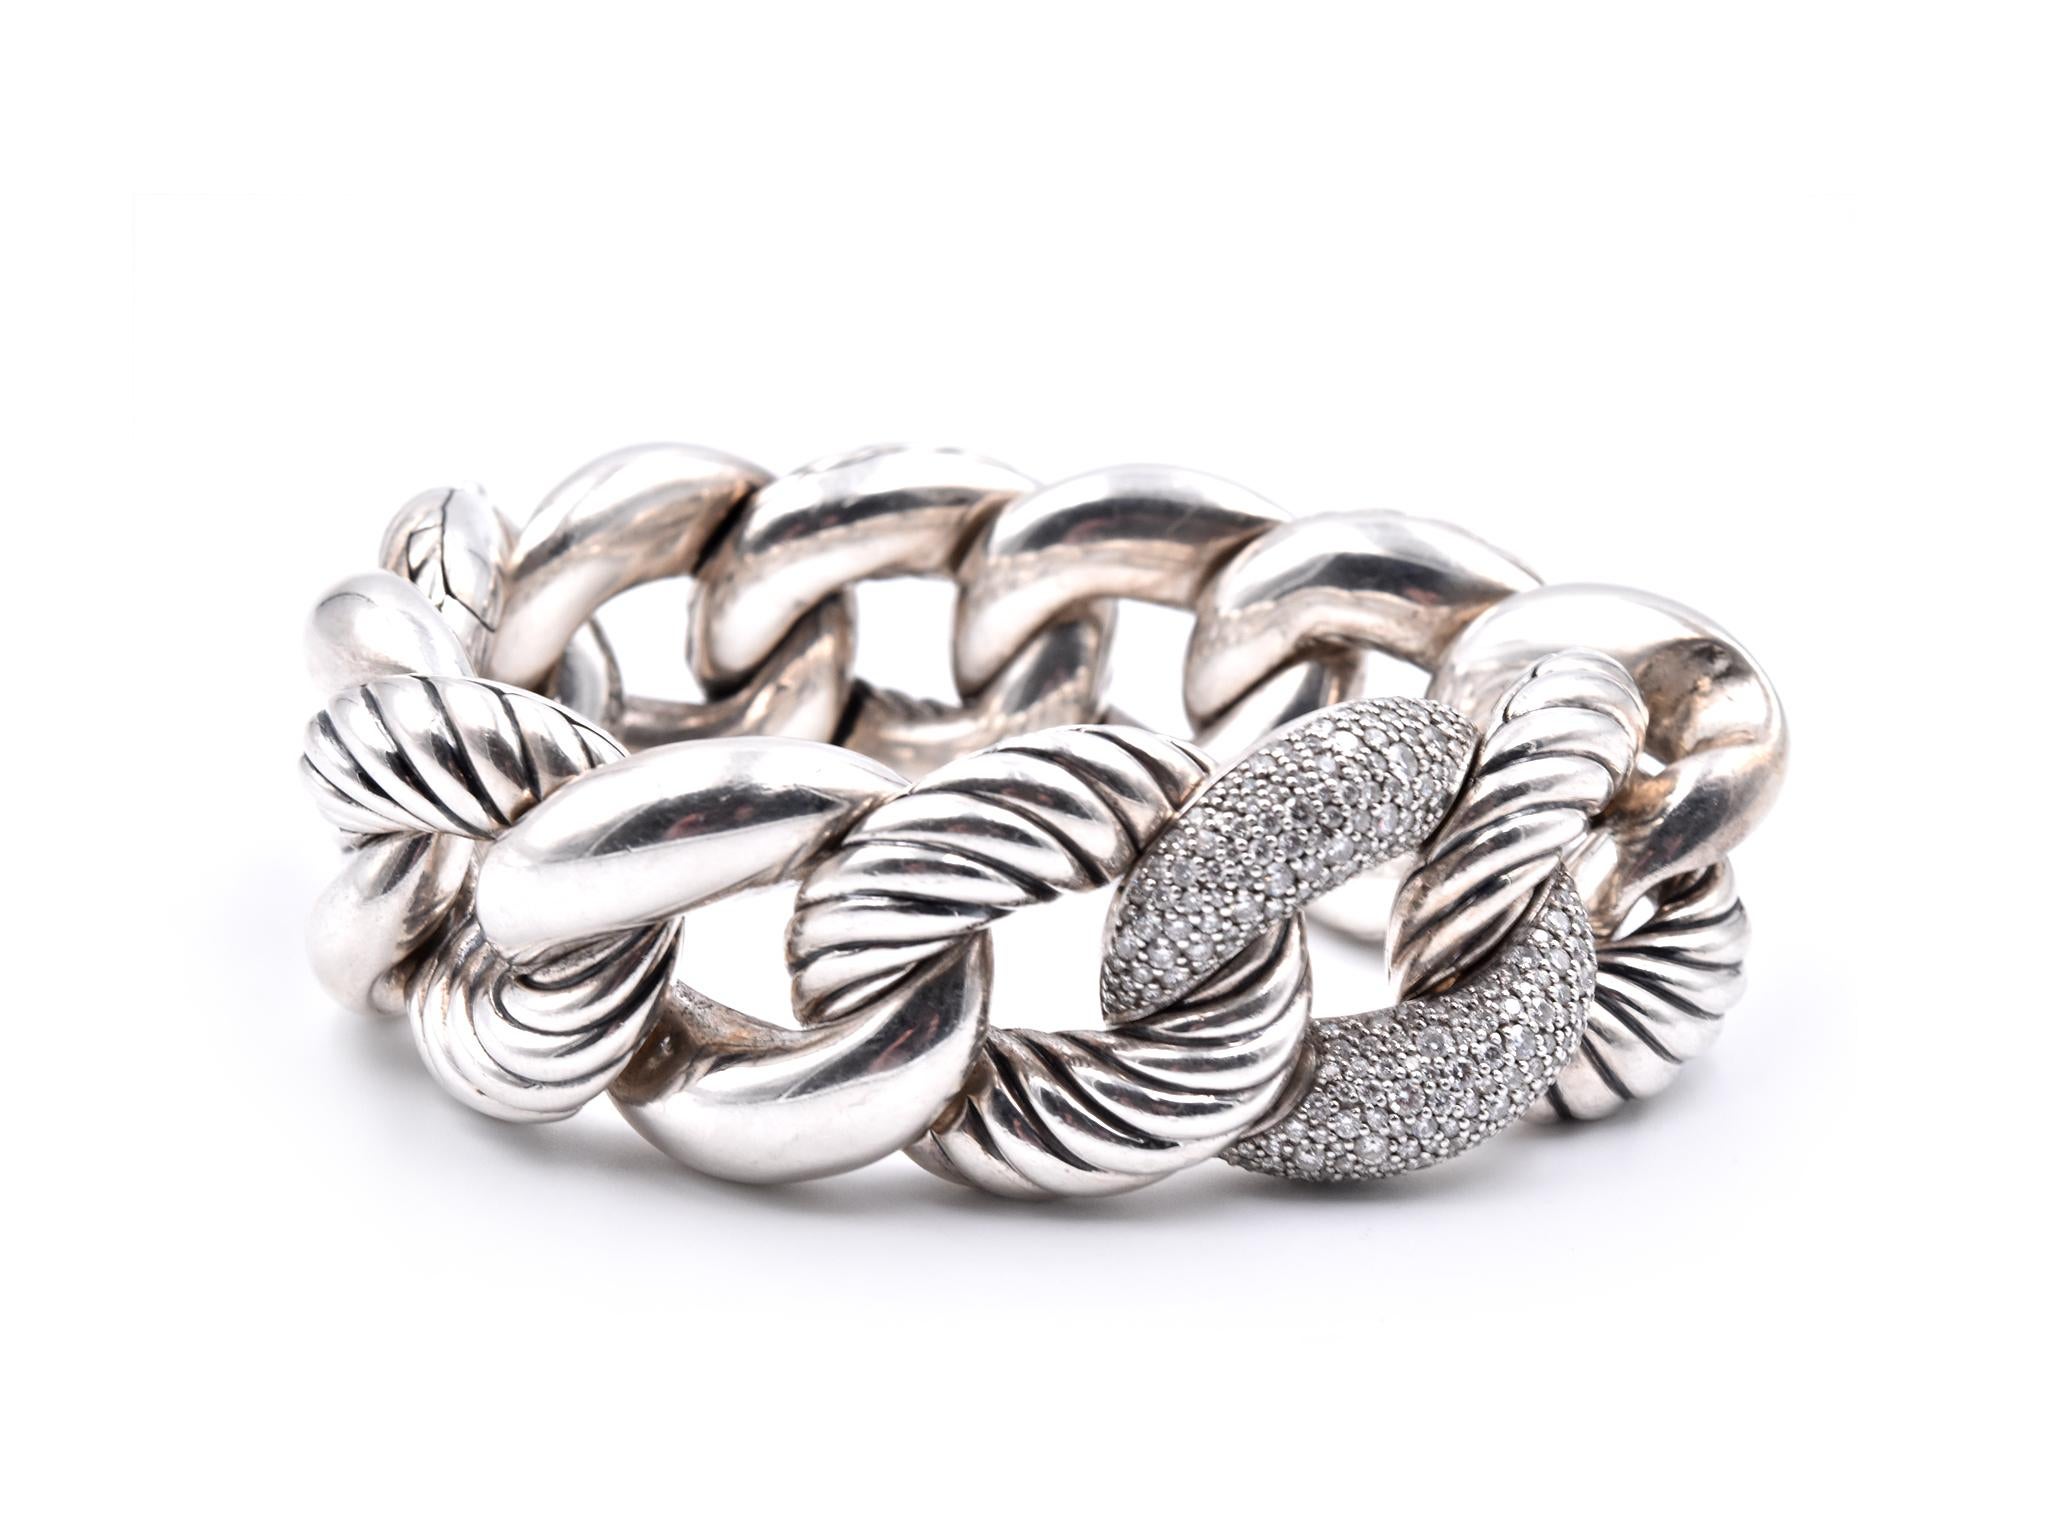 Designer: David Yurman
Material: sterling silver 
Diamonds: 1.10cttw 
Color: G
Clarity: VS
Dimensions: bracelet is 25mm wide and 8-inches long
Weight: 130.83 grams
Retail: $5,800
